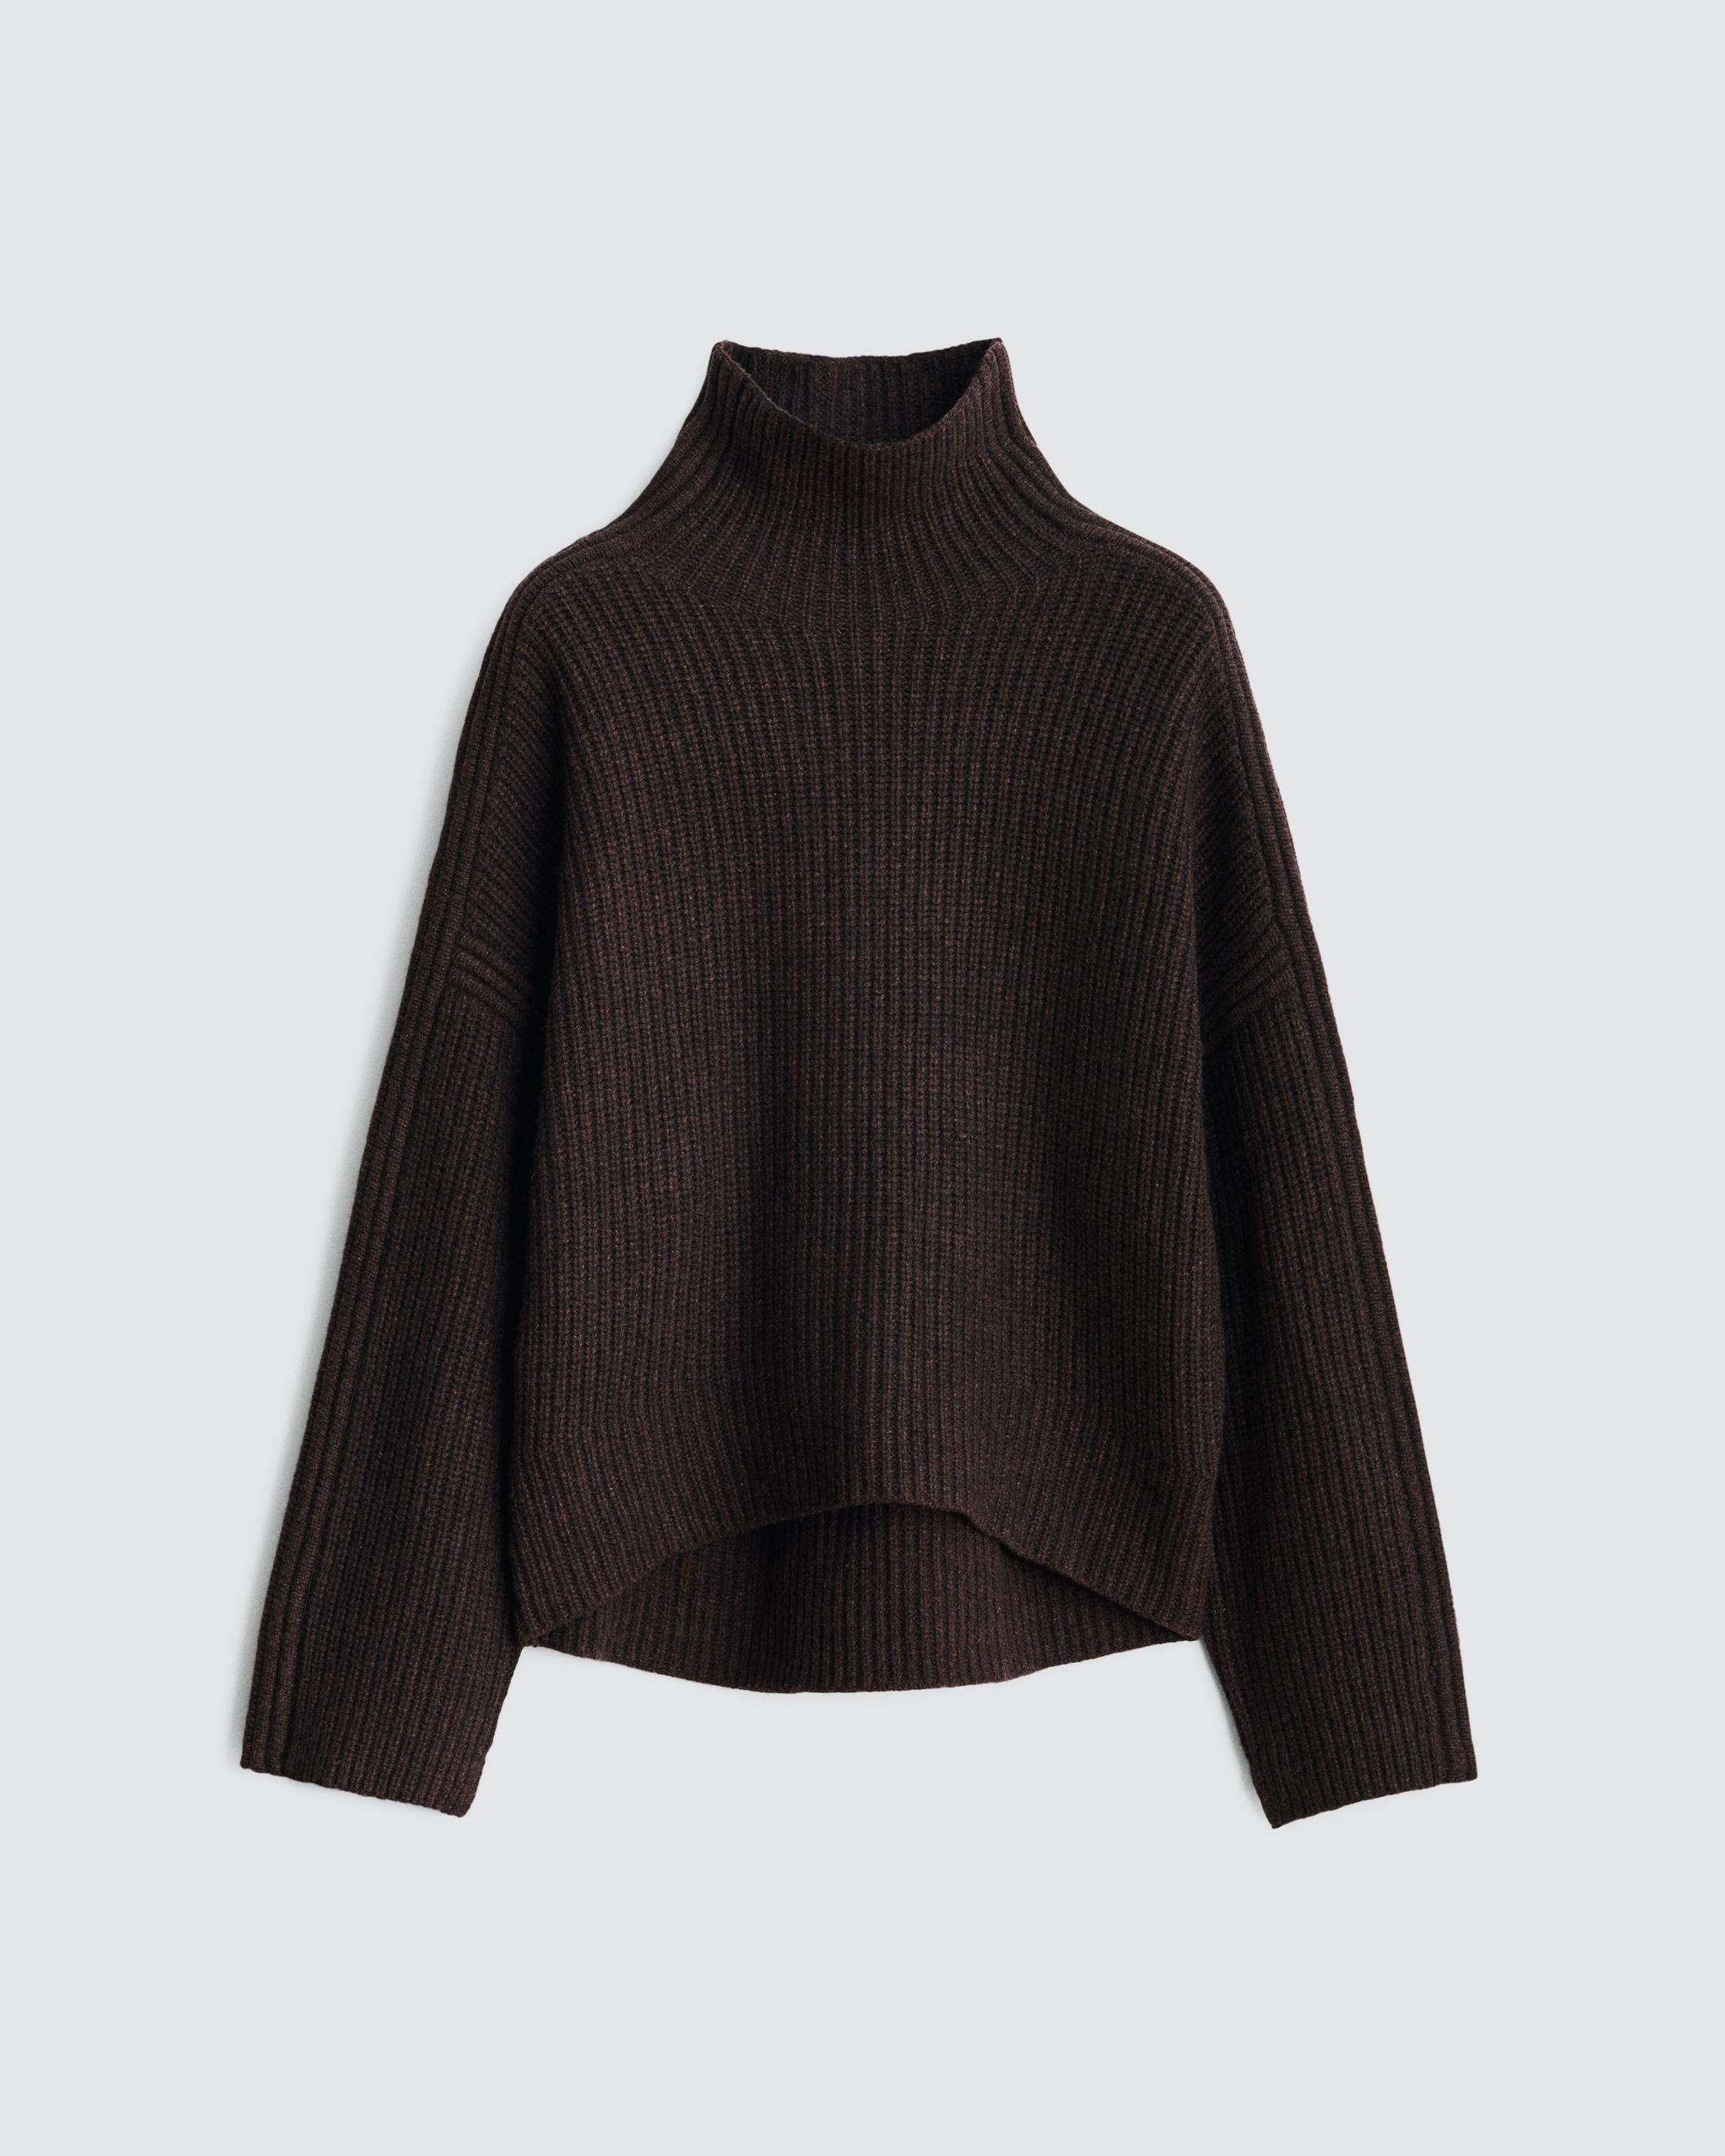 Connie Wool Turtleneck
Oversized Fit - 1